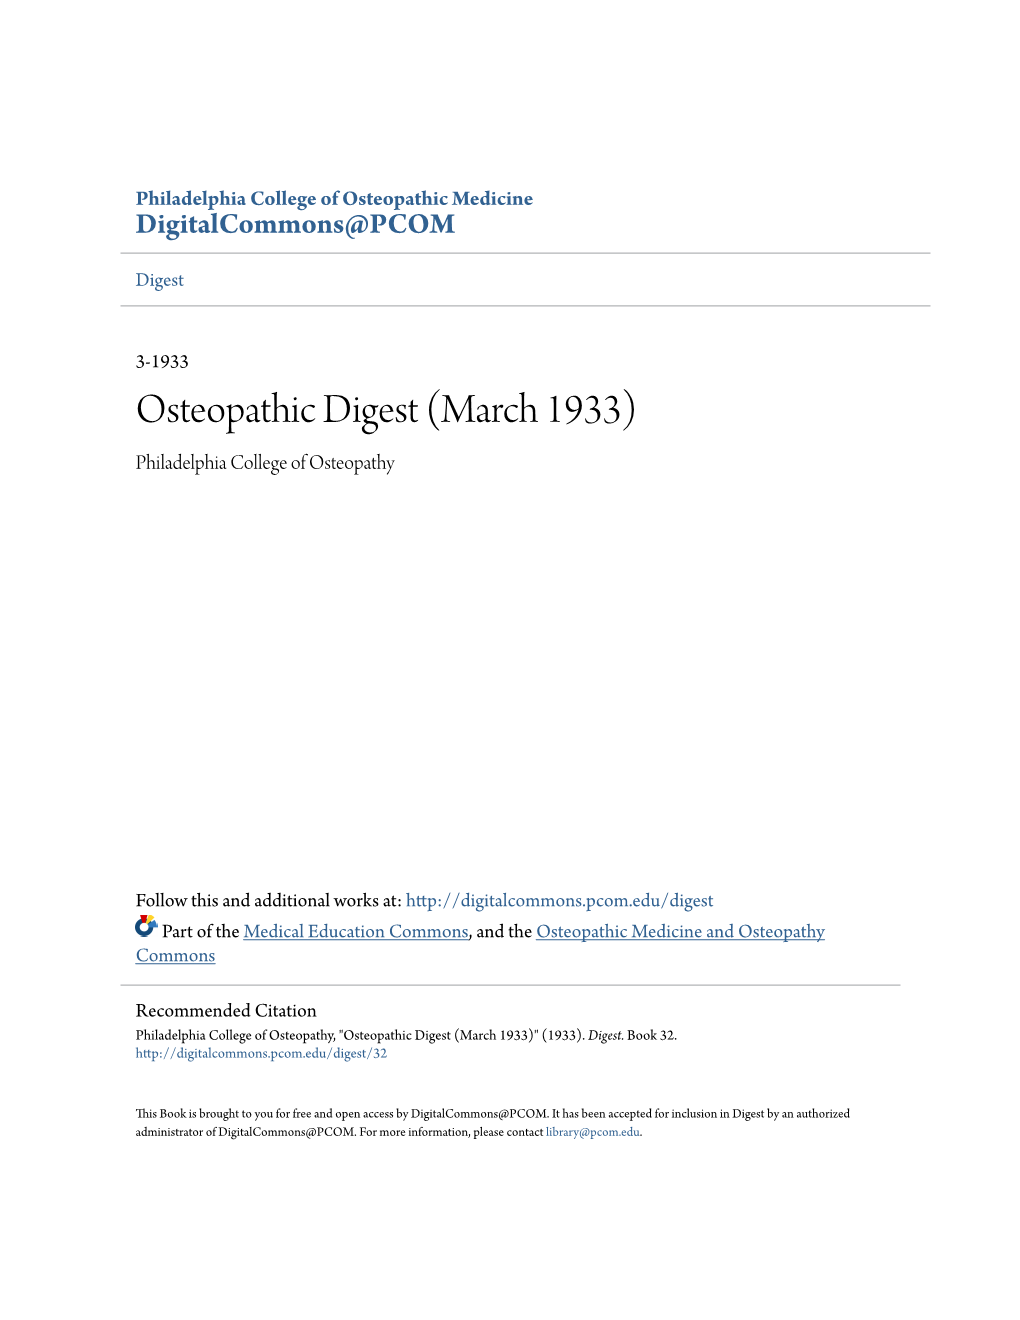 Osteopathic Digest (March 1933) Philadelphia College of Osteopathy